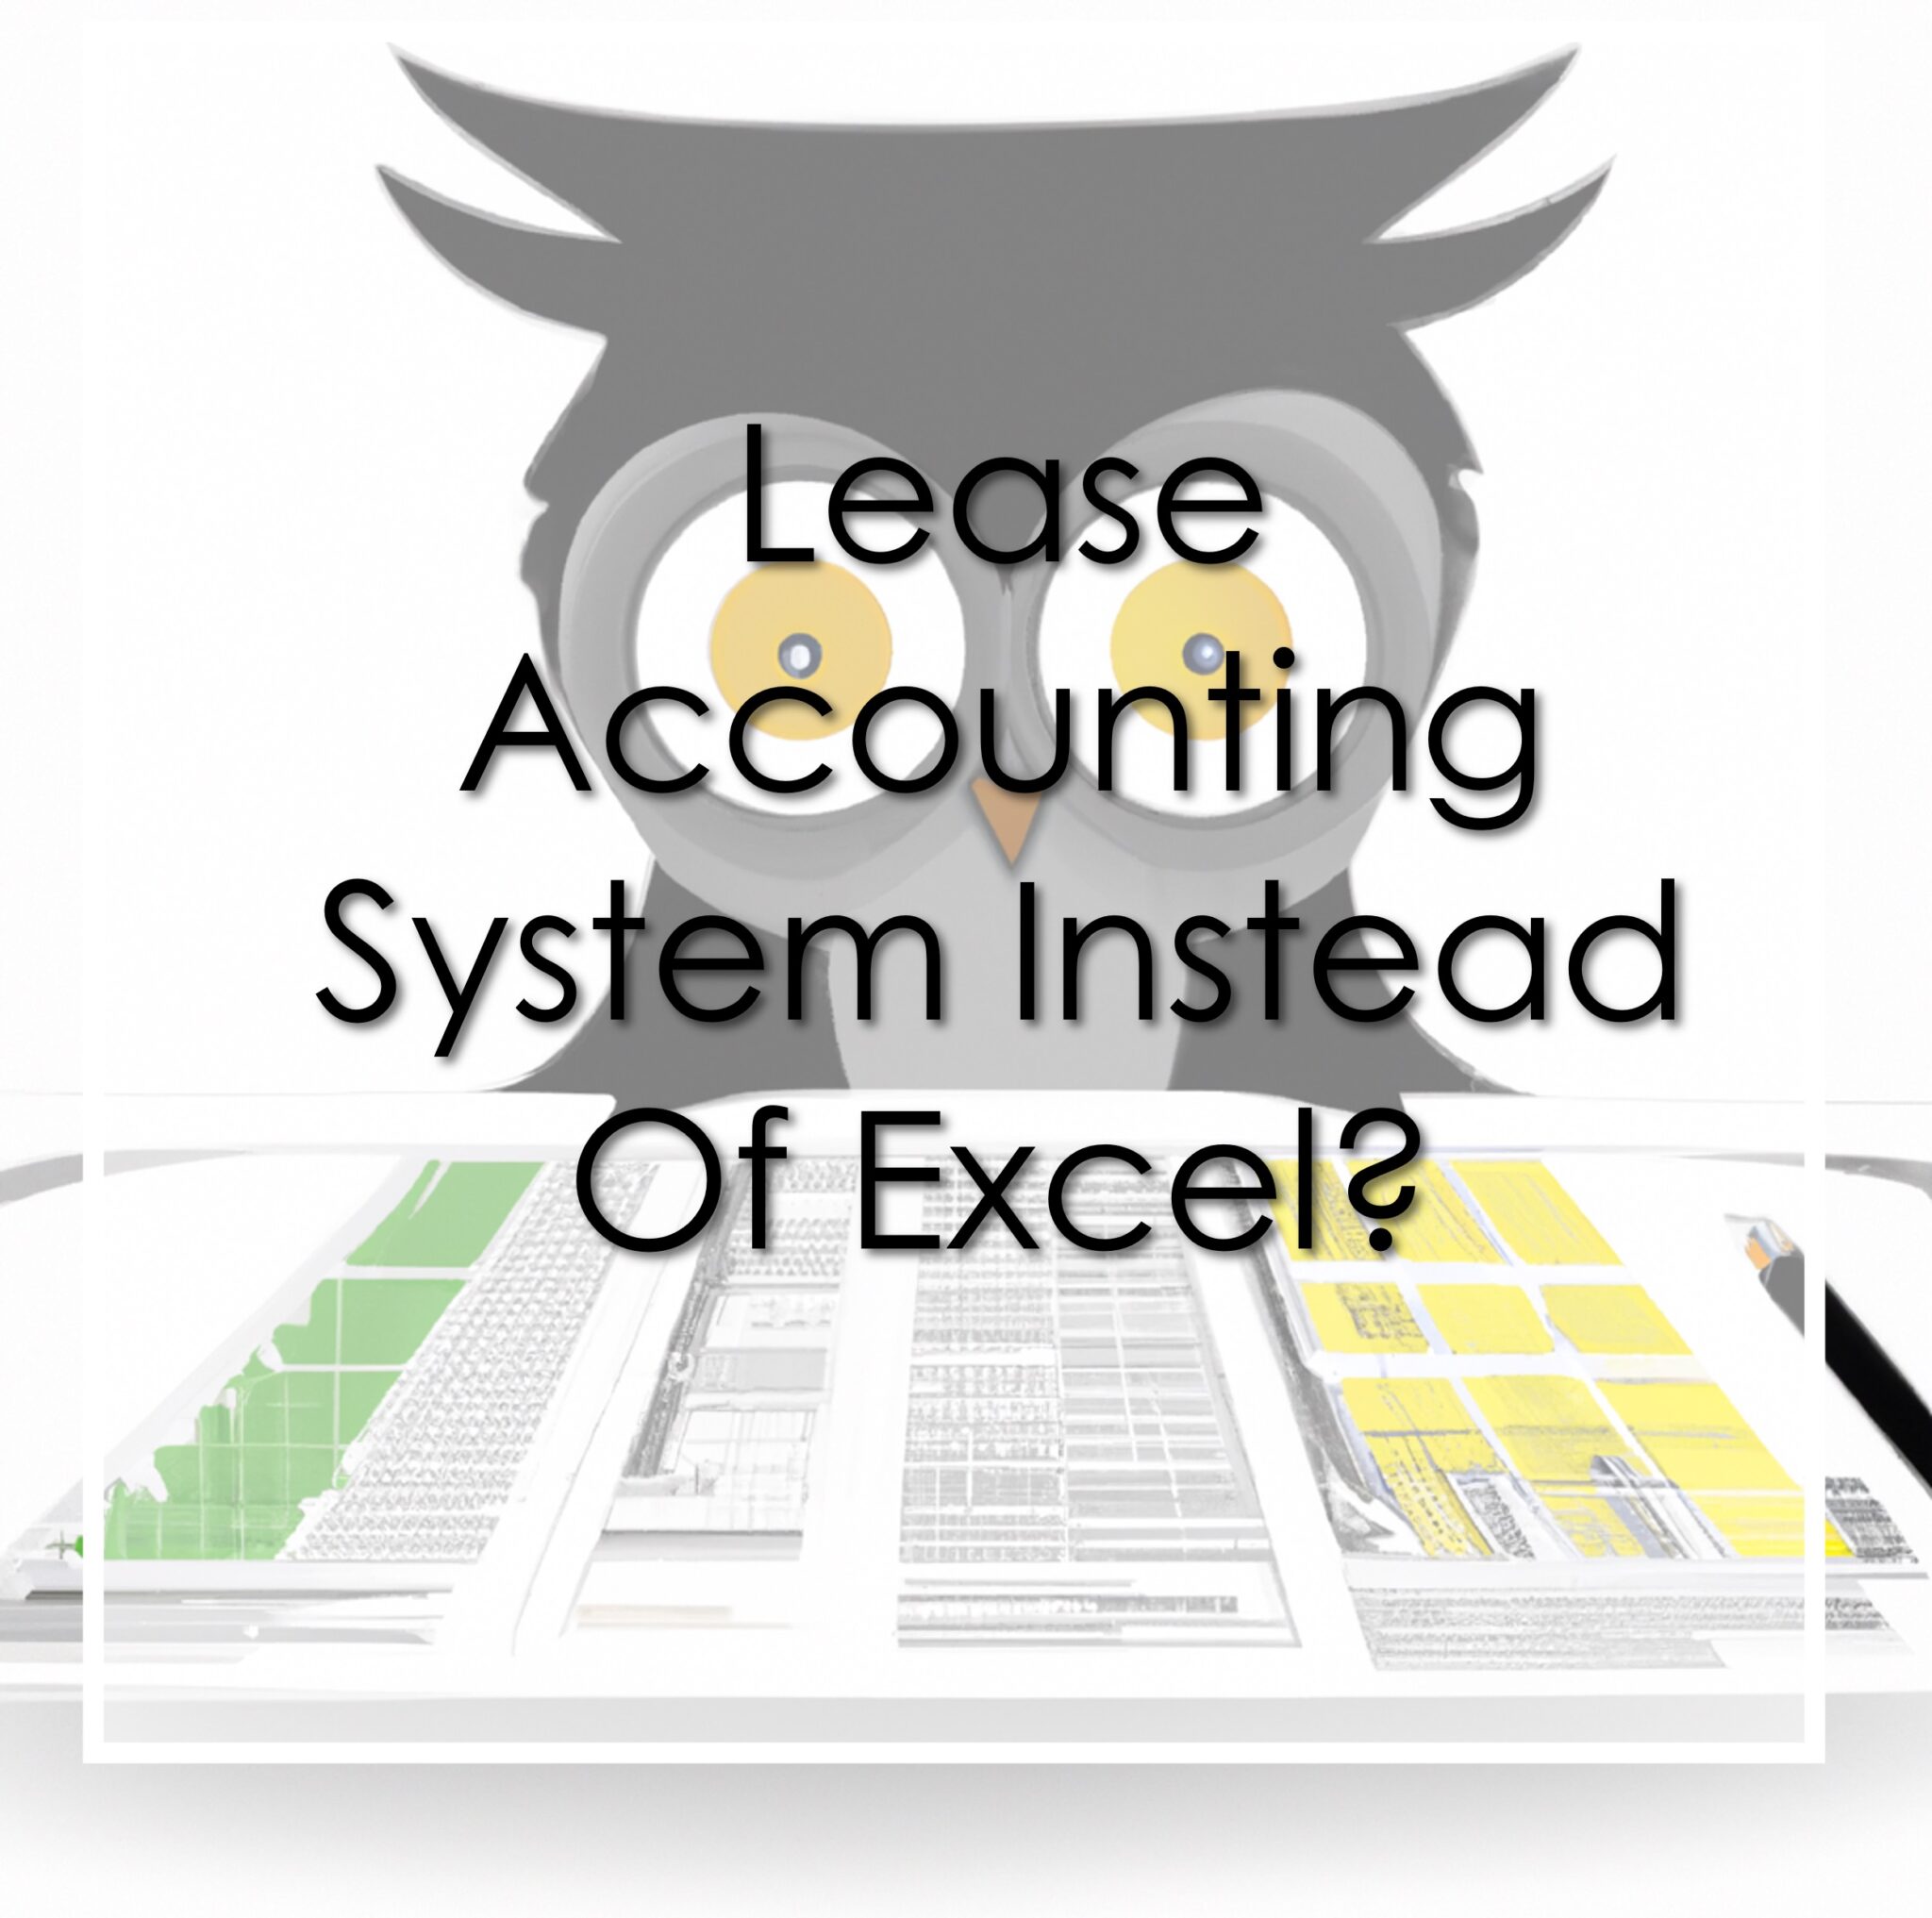 Lease Accounting System Benefits